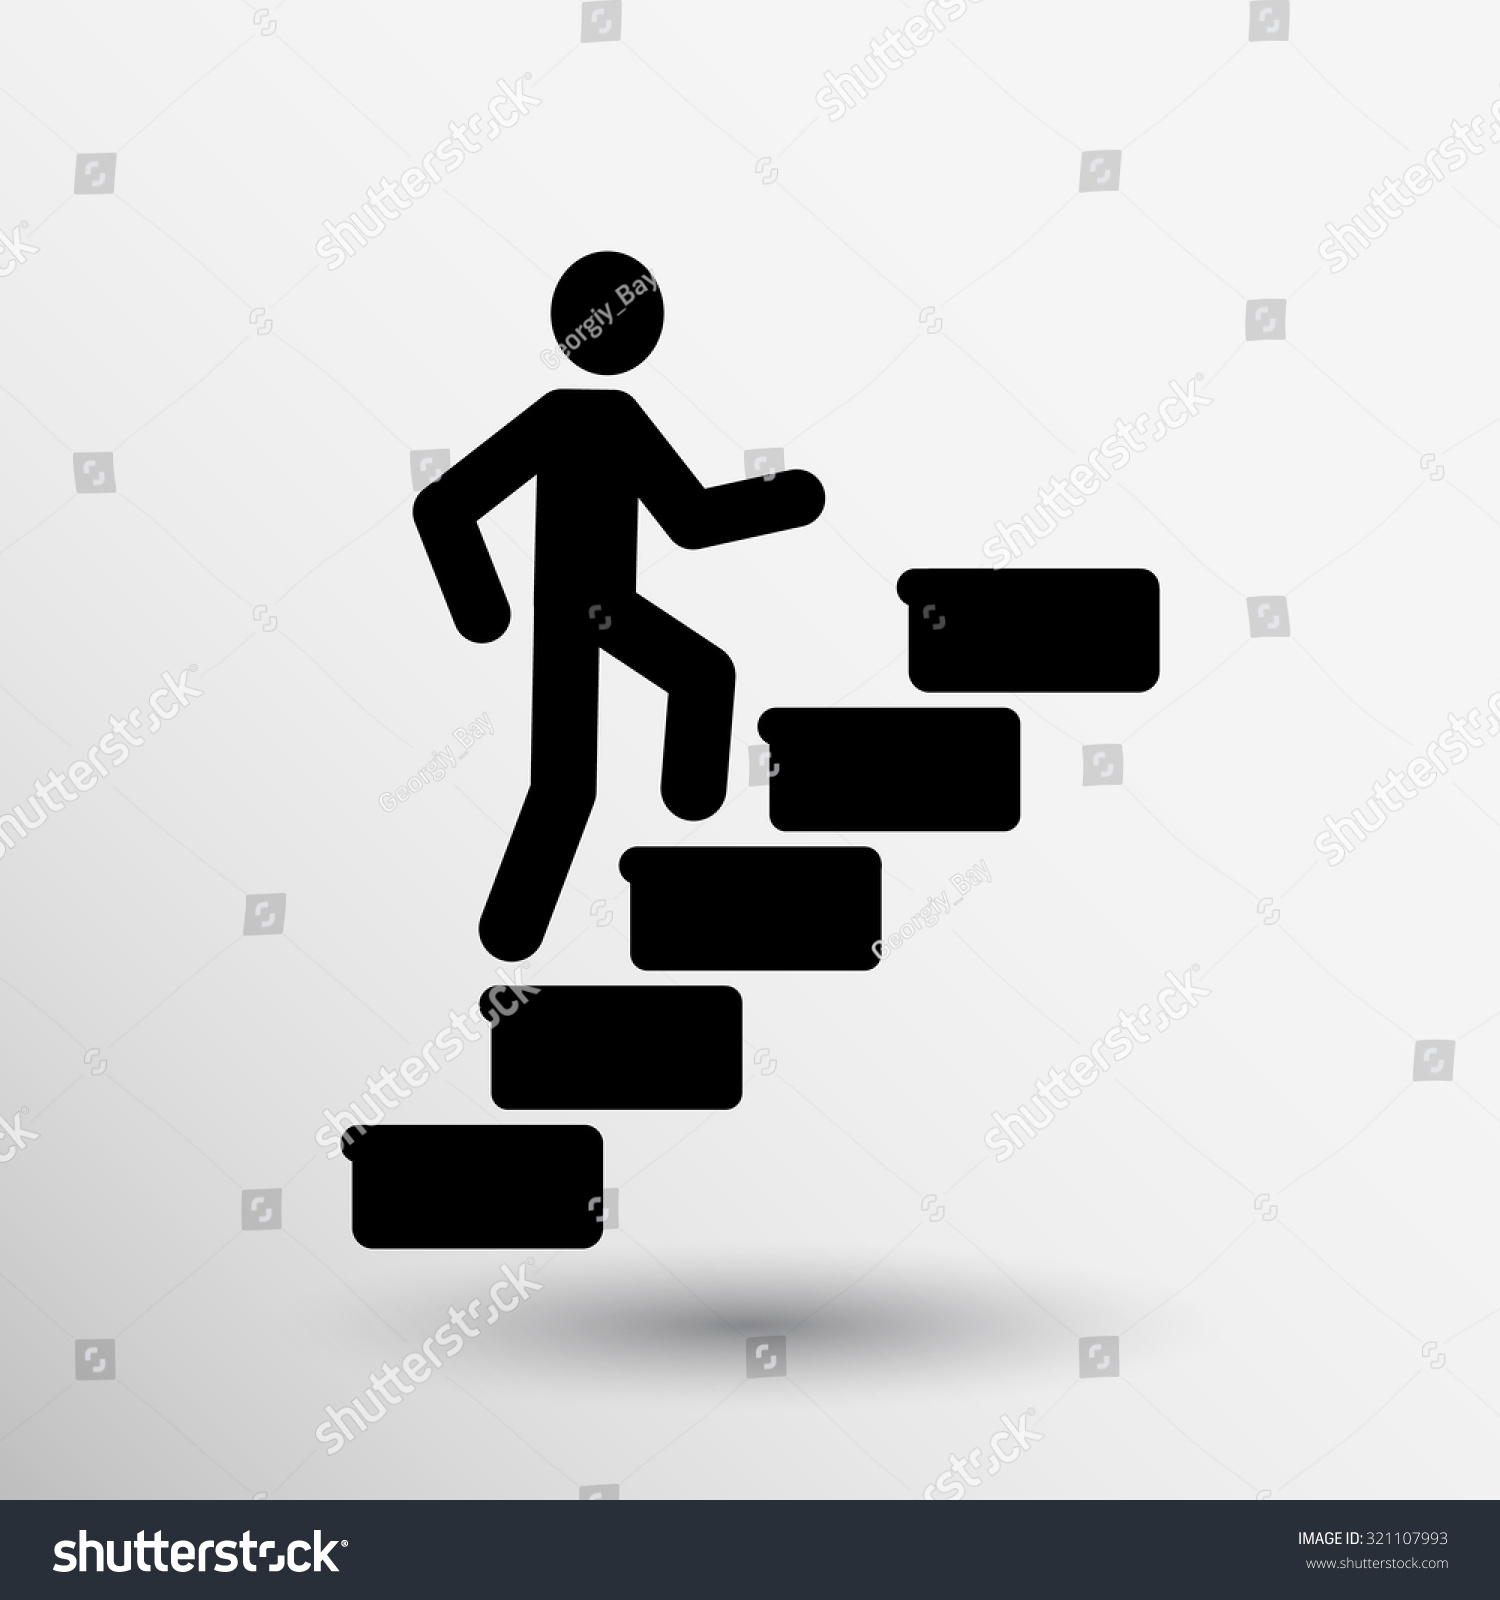 Man On Stairs Icon Vector Button Stock Vector 321107993 - Shutterstock